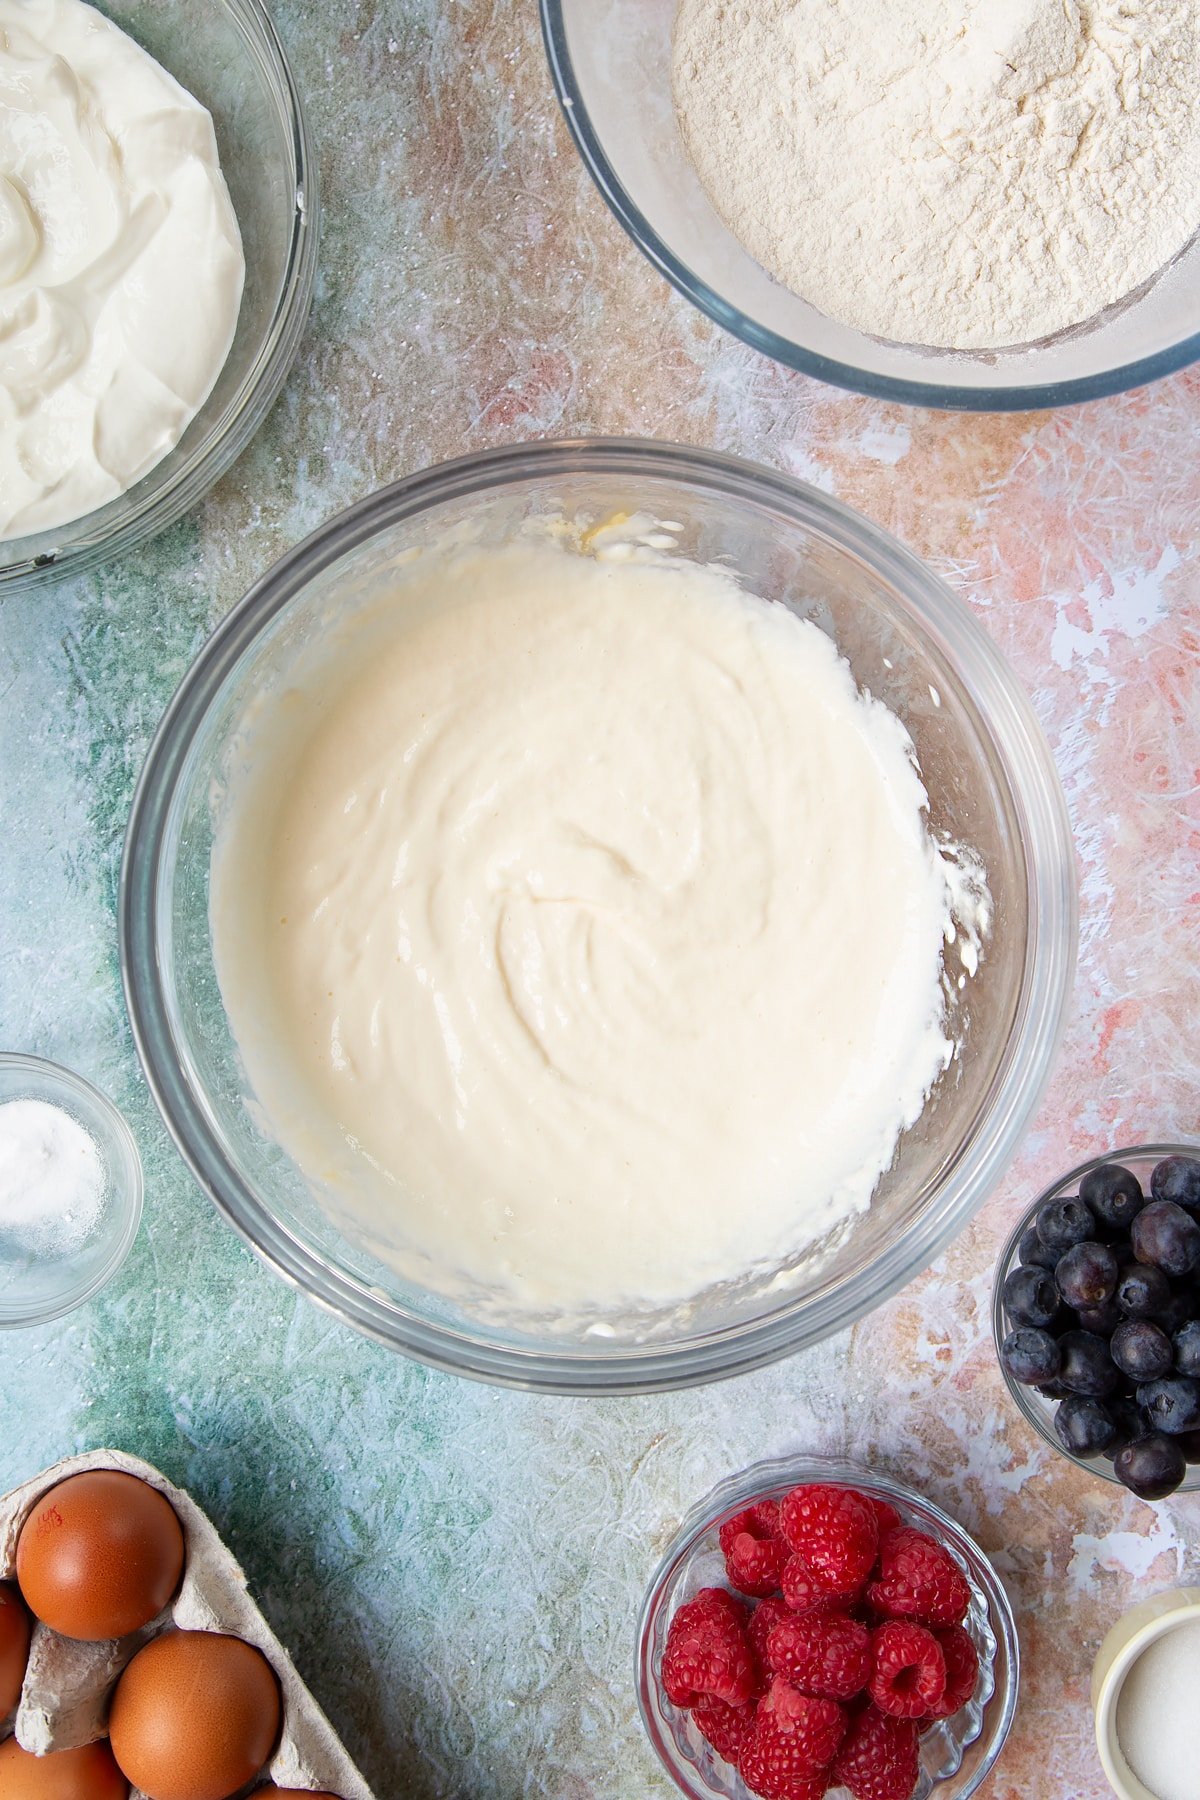 Eggs, skyr and milk whisked together in a mixing bowl. Berries and ingredients to make skyr pancakes surround the bowl.